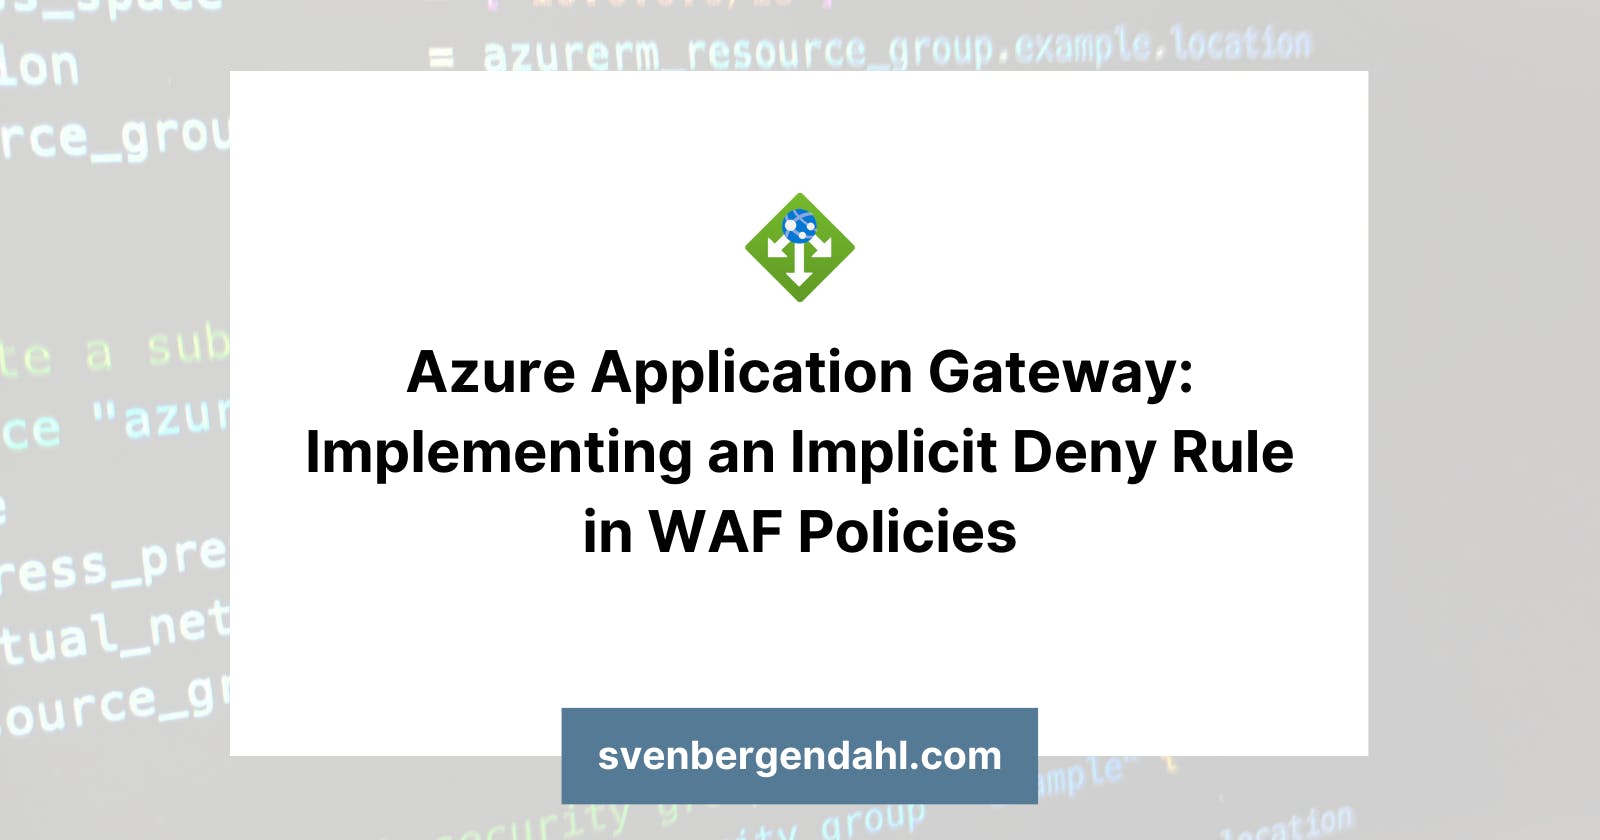 Azure Application Gateway: Implementing an Implicit Deny Rule in WAF Policies